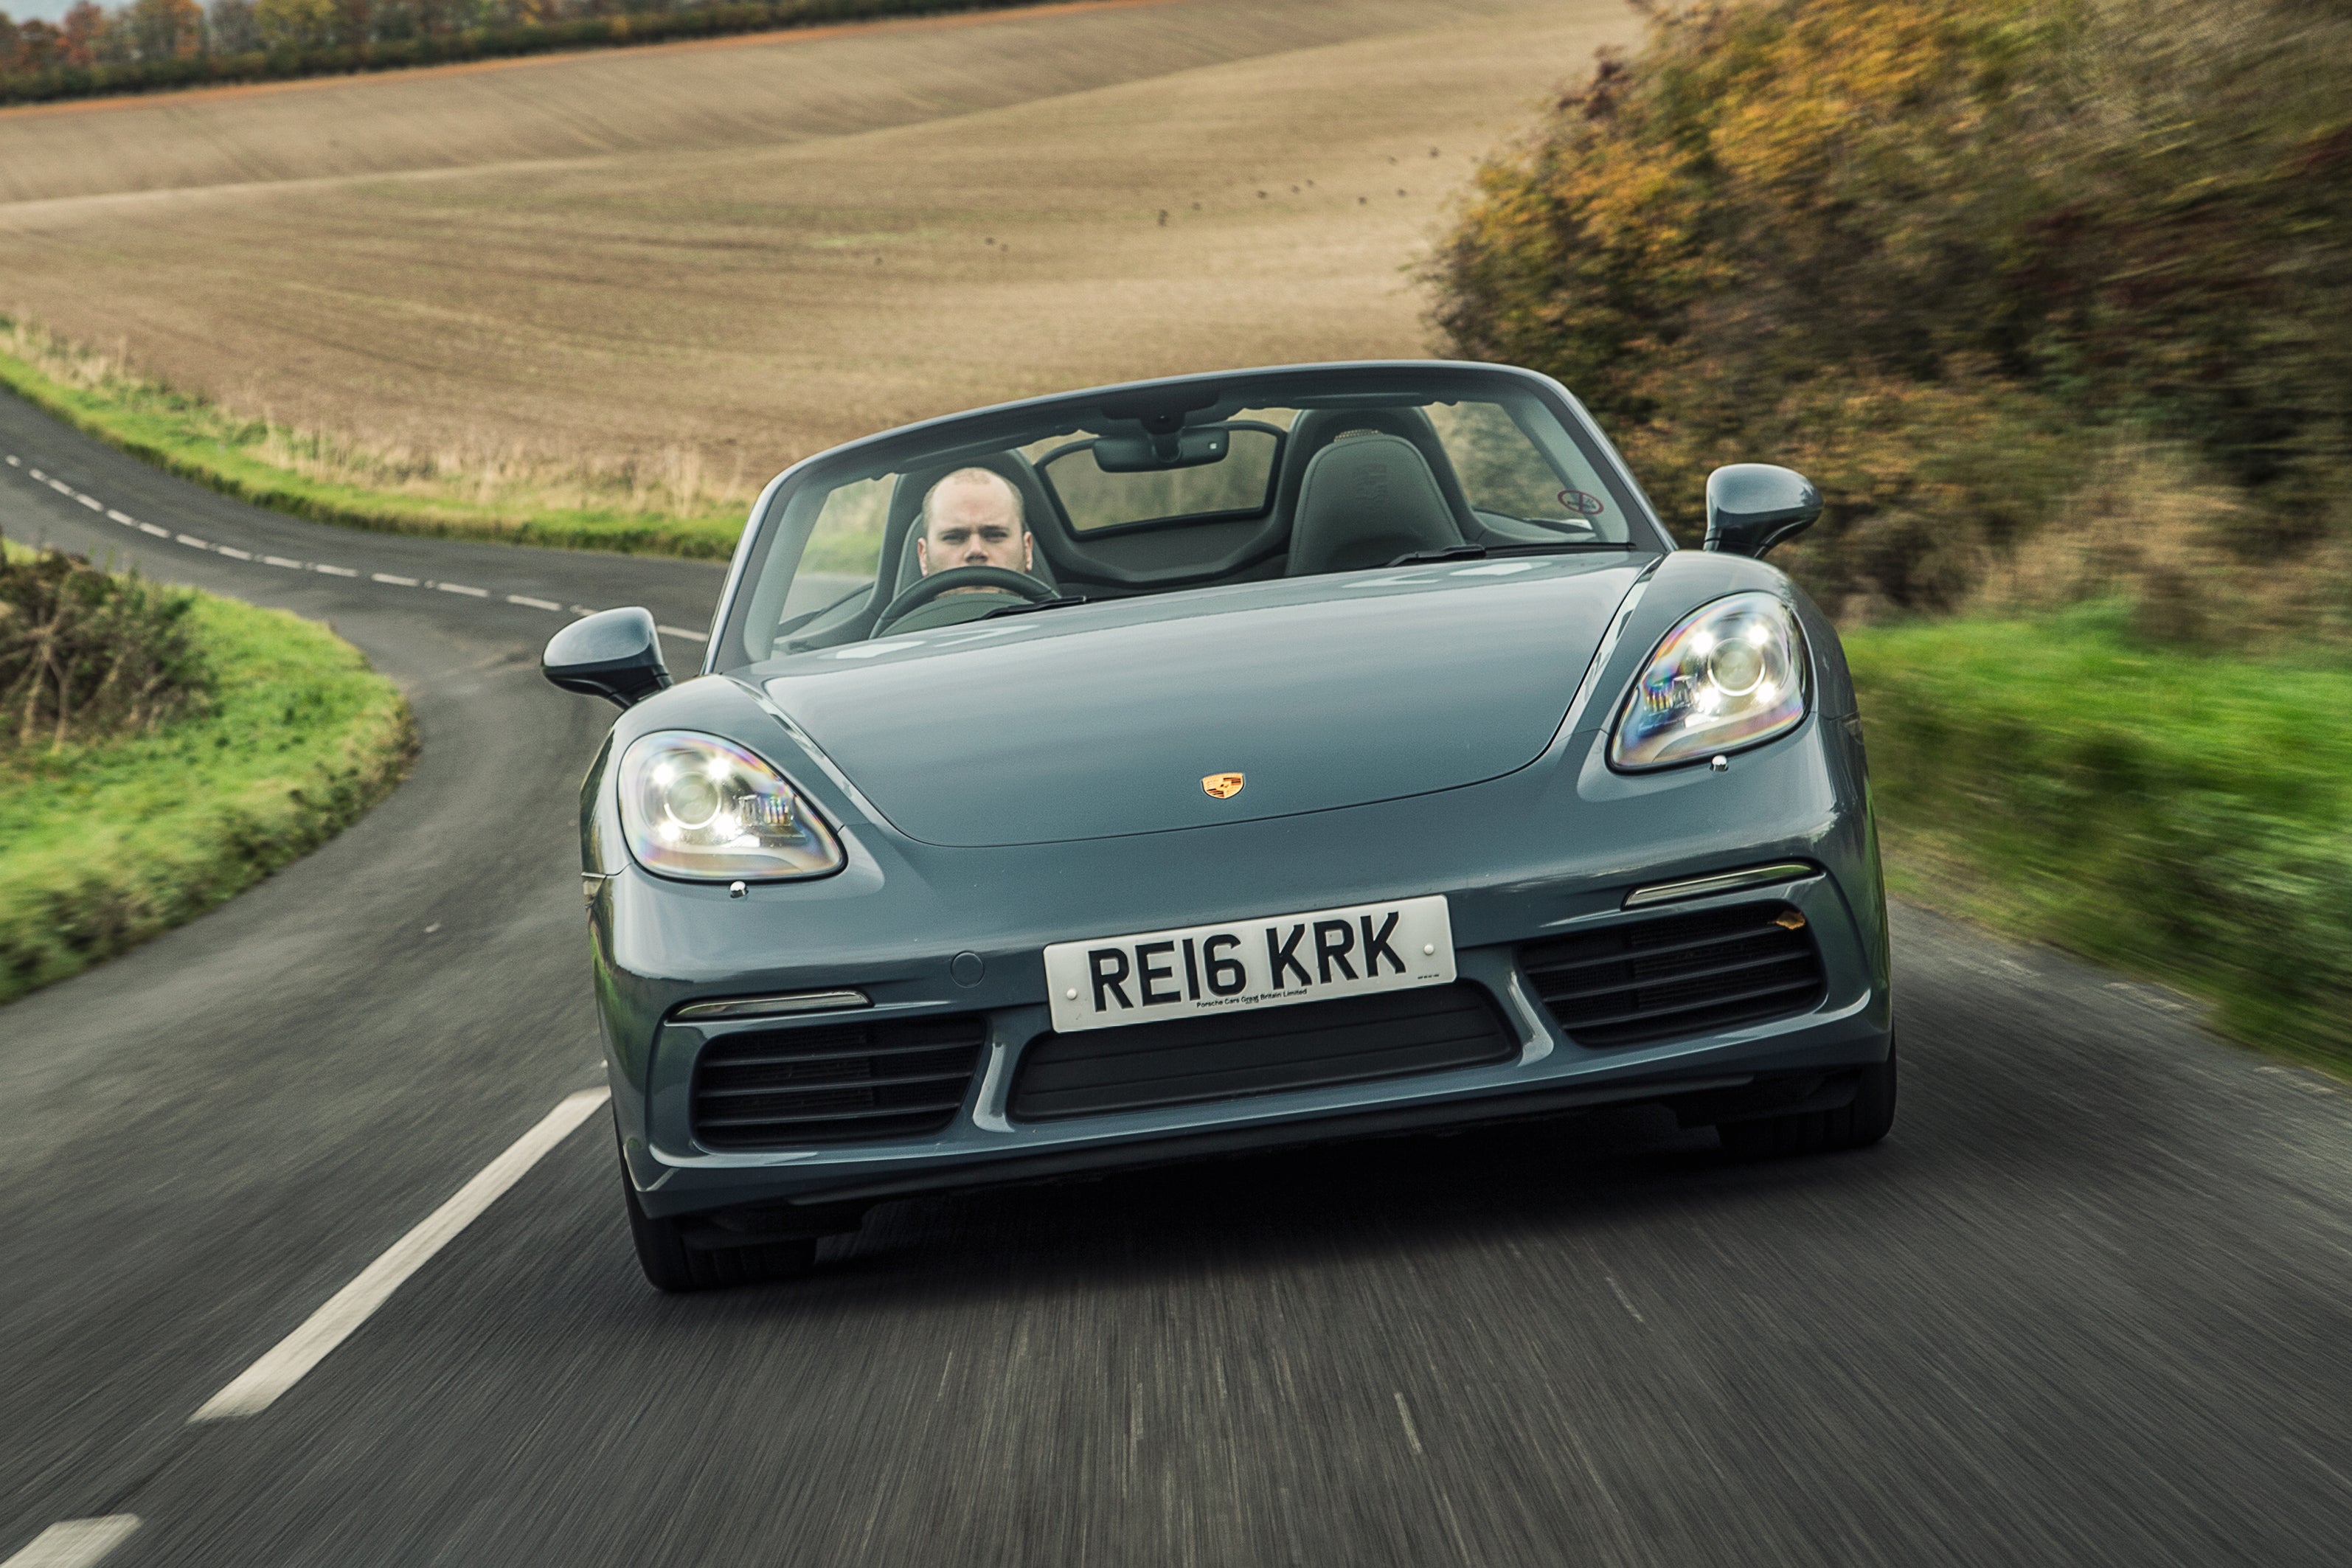 Porsche 718 Boxster Review 2023: exterior front photo of the Porsche Boxster 718 on the road